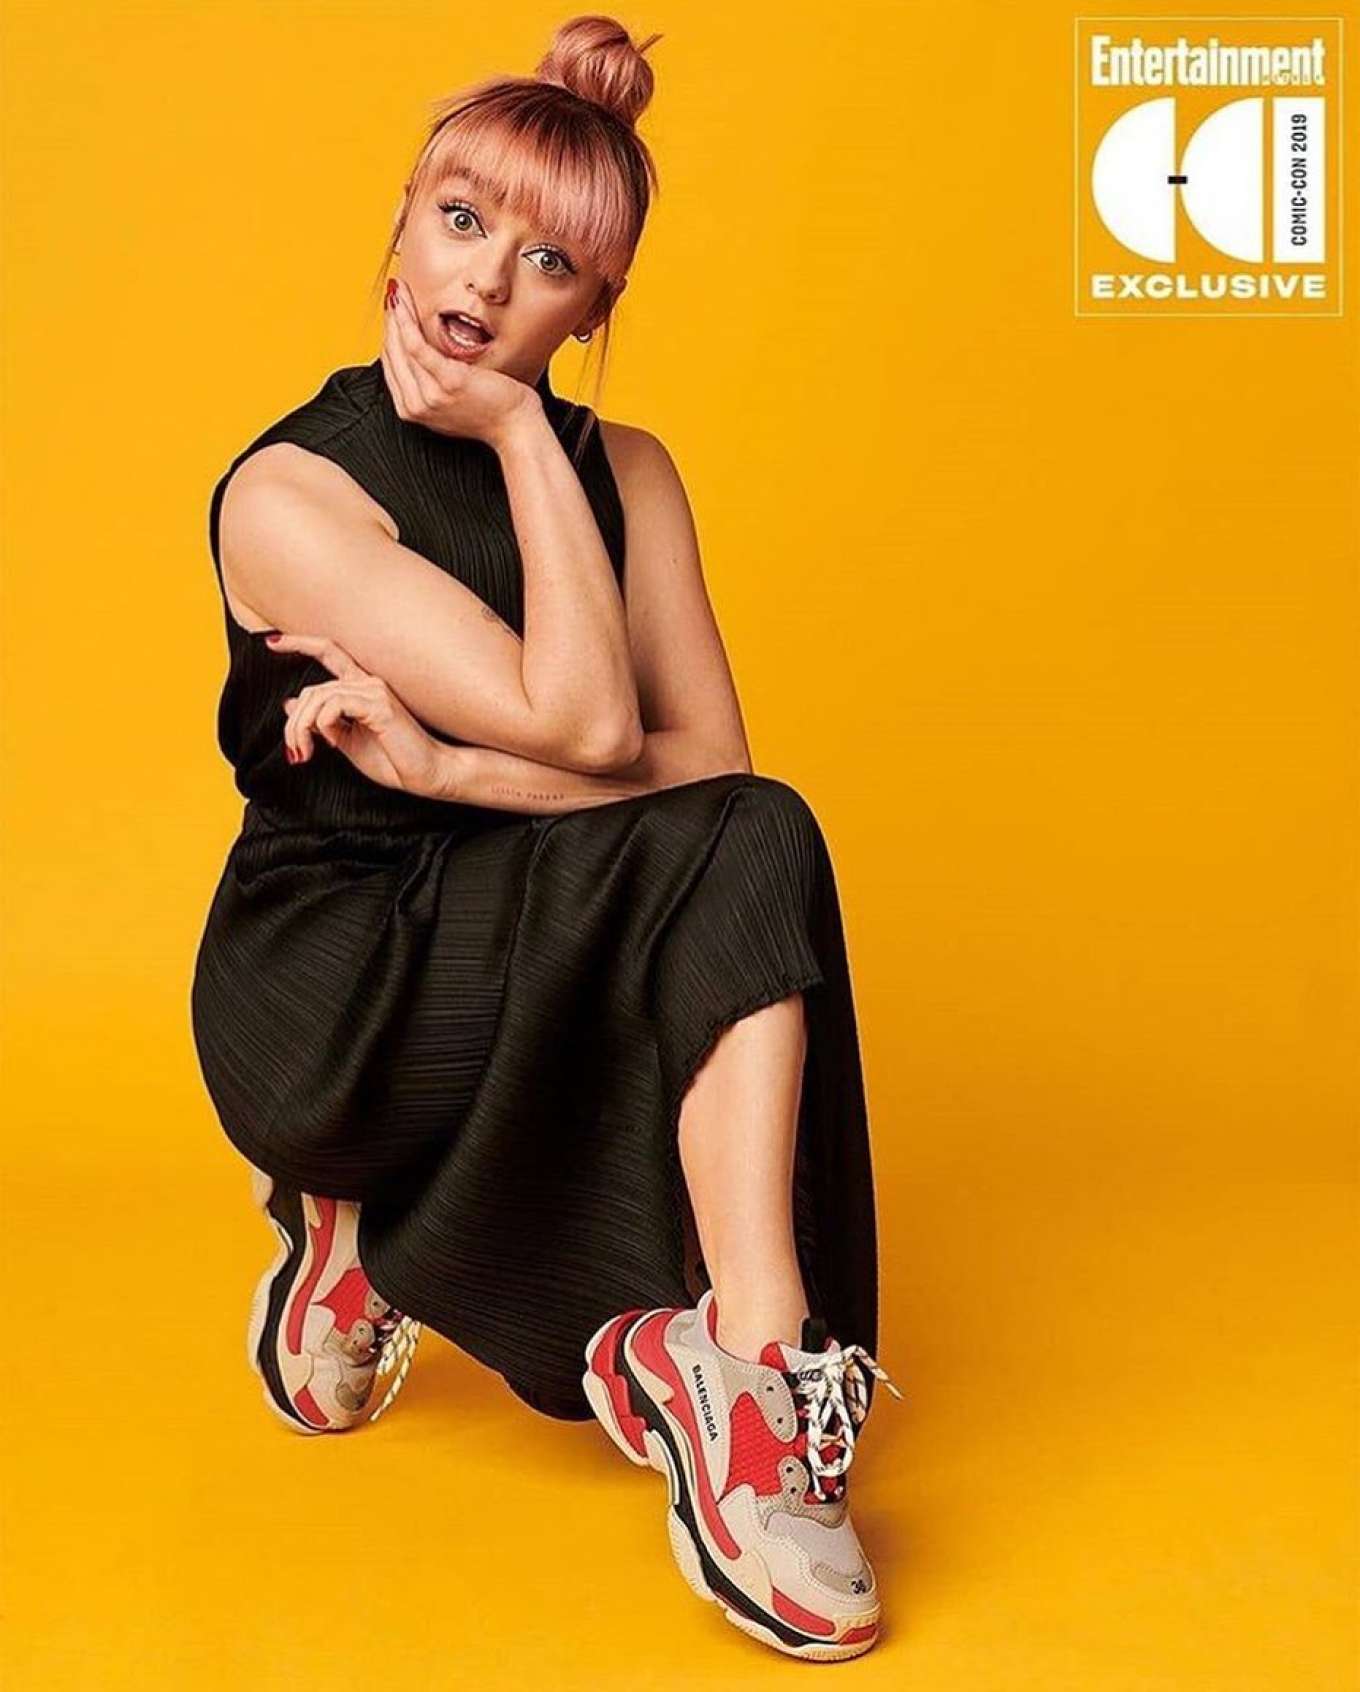 Maisie Williams Photoshoot At The Entertainment Weekly Comic Con